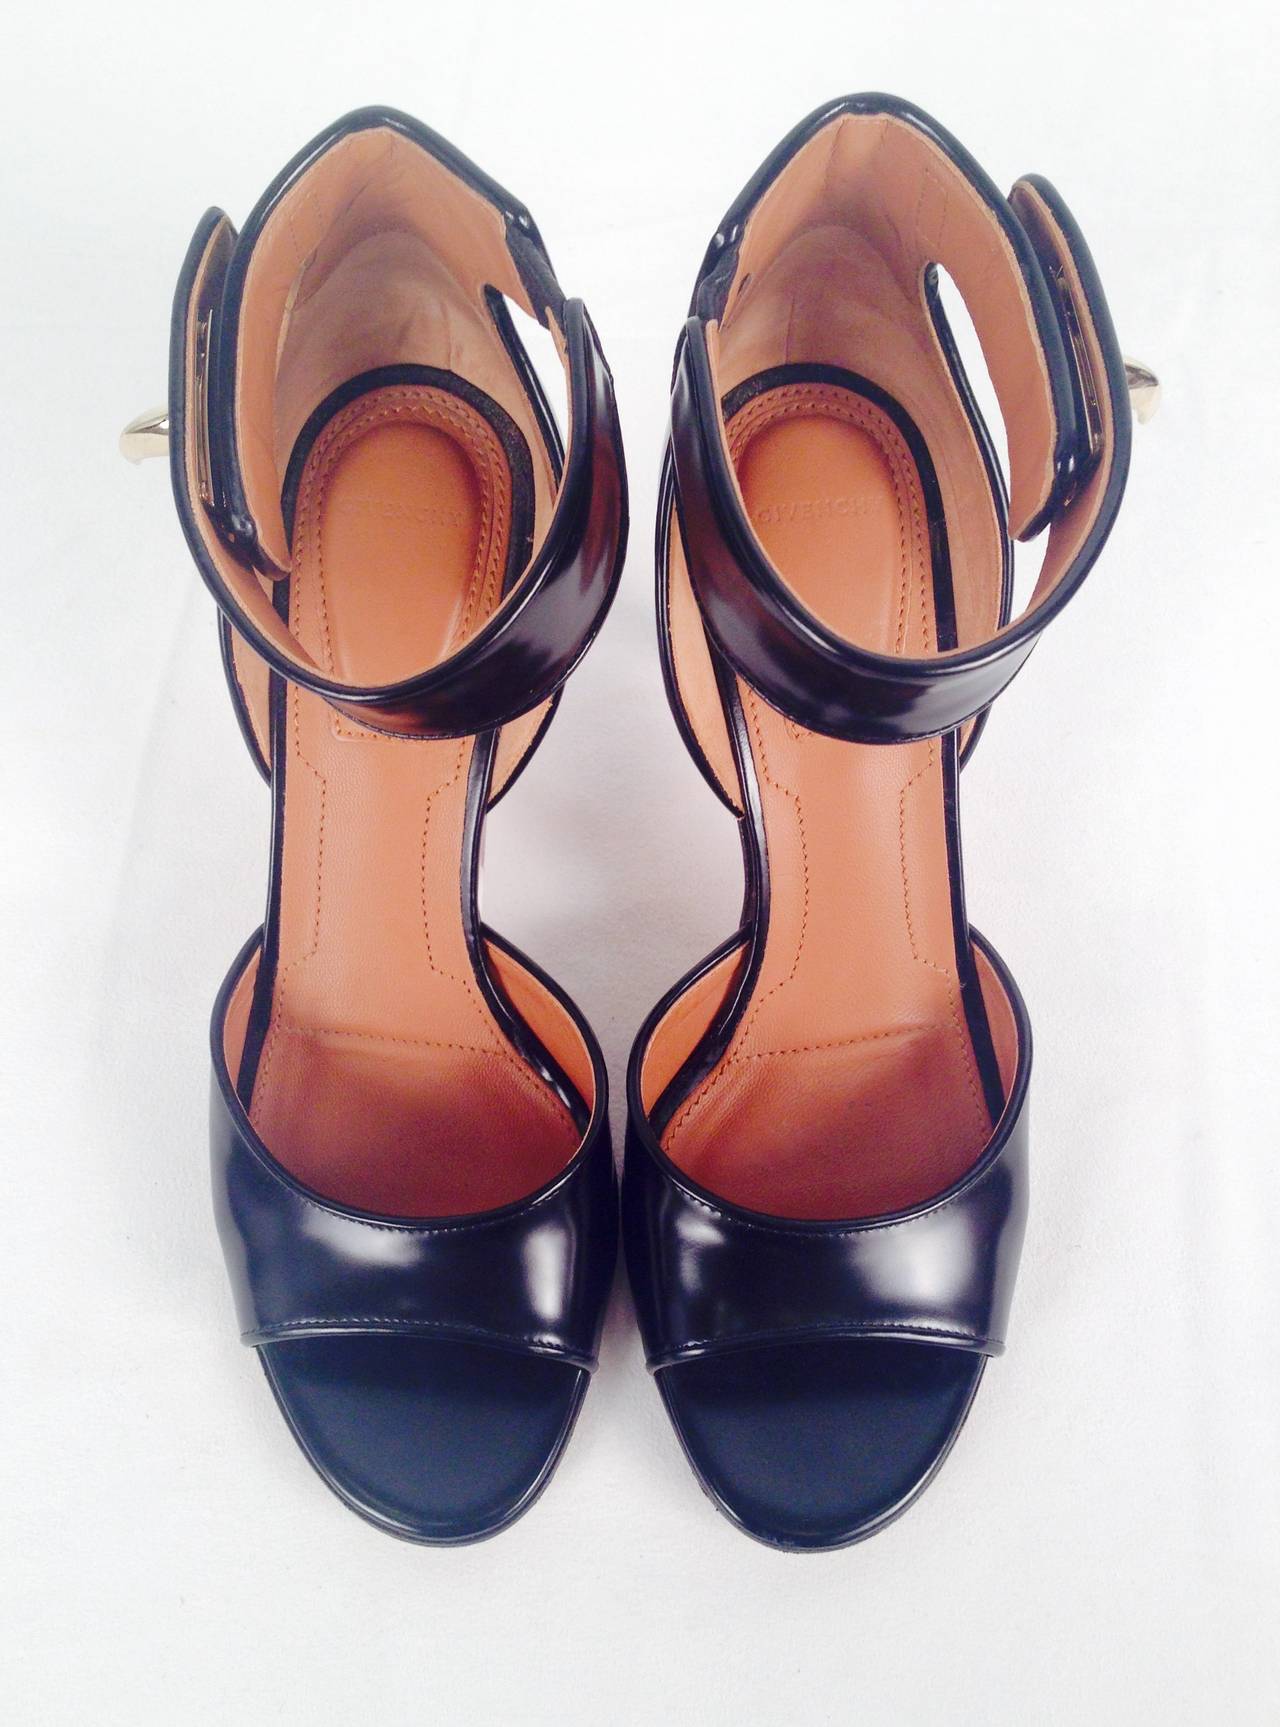 Women's Givenchy Black Polished Calfskin PeepToe Heels With Ankle Straps